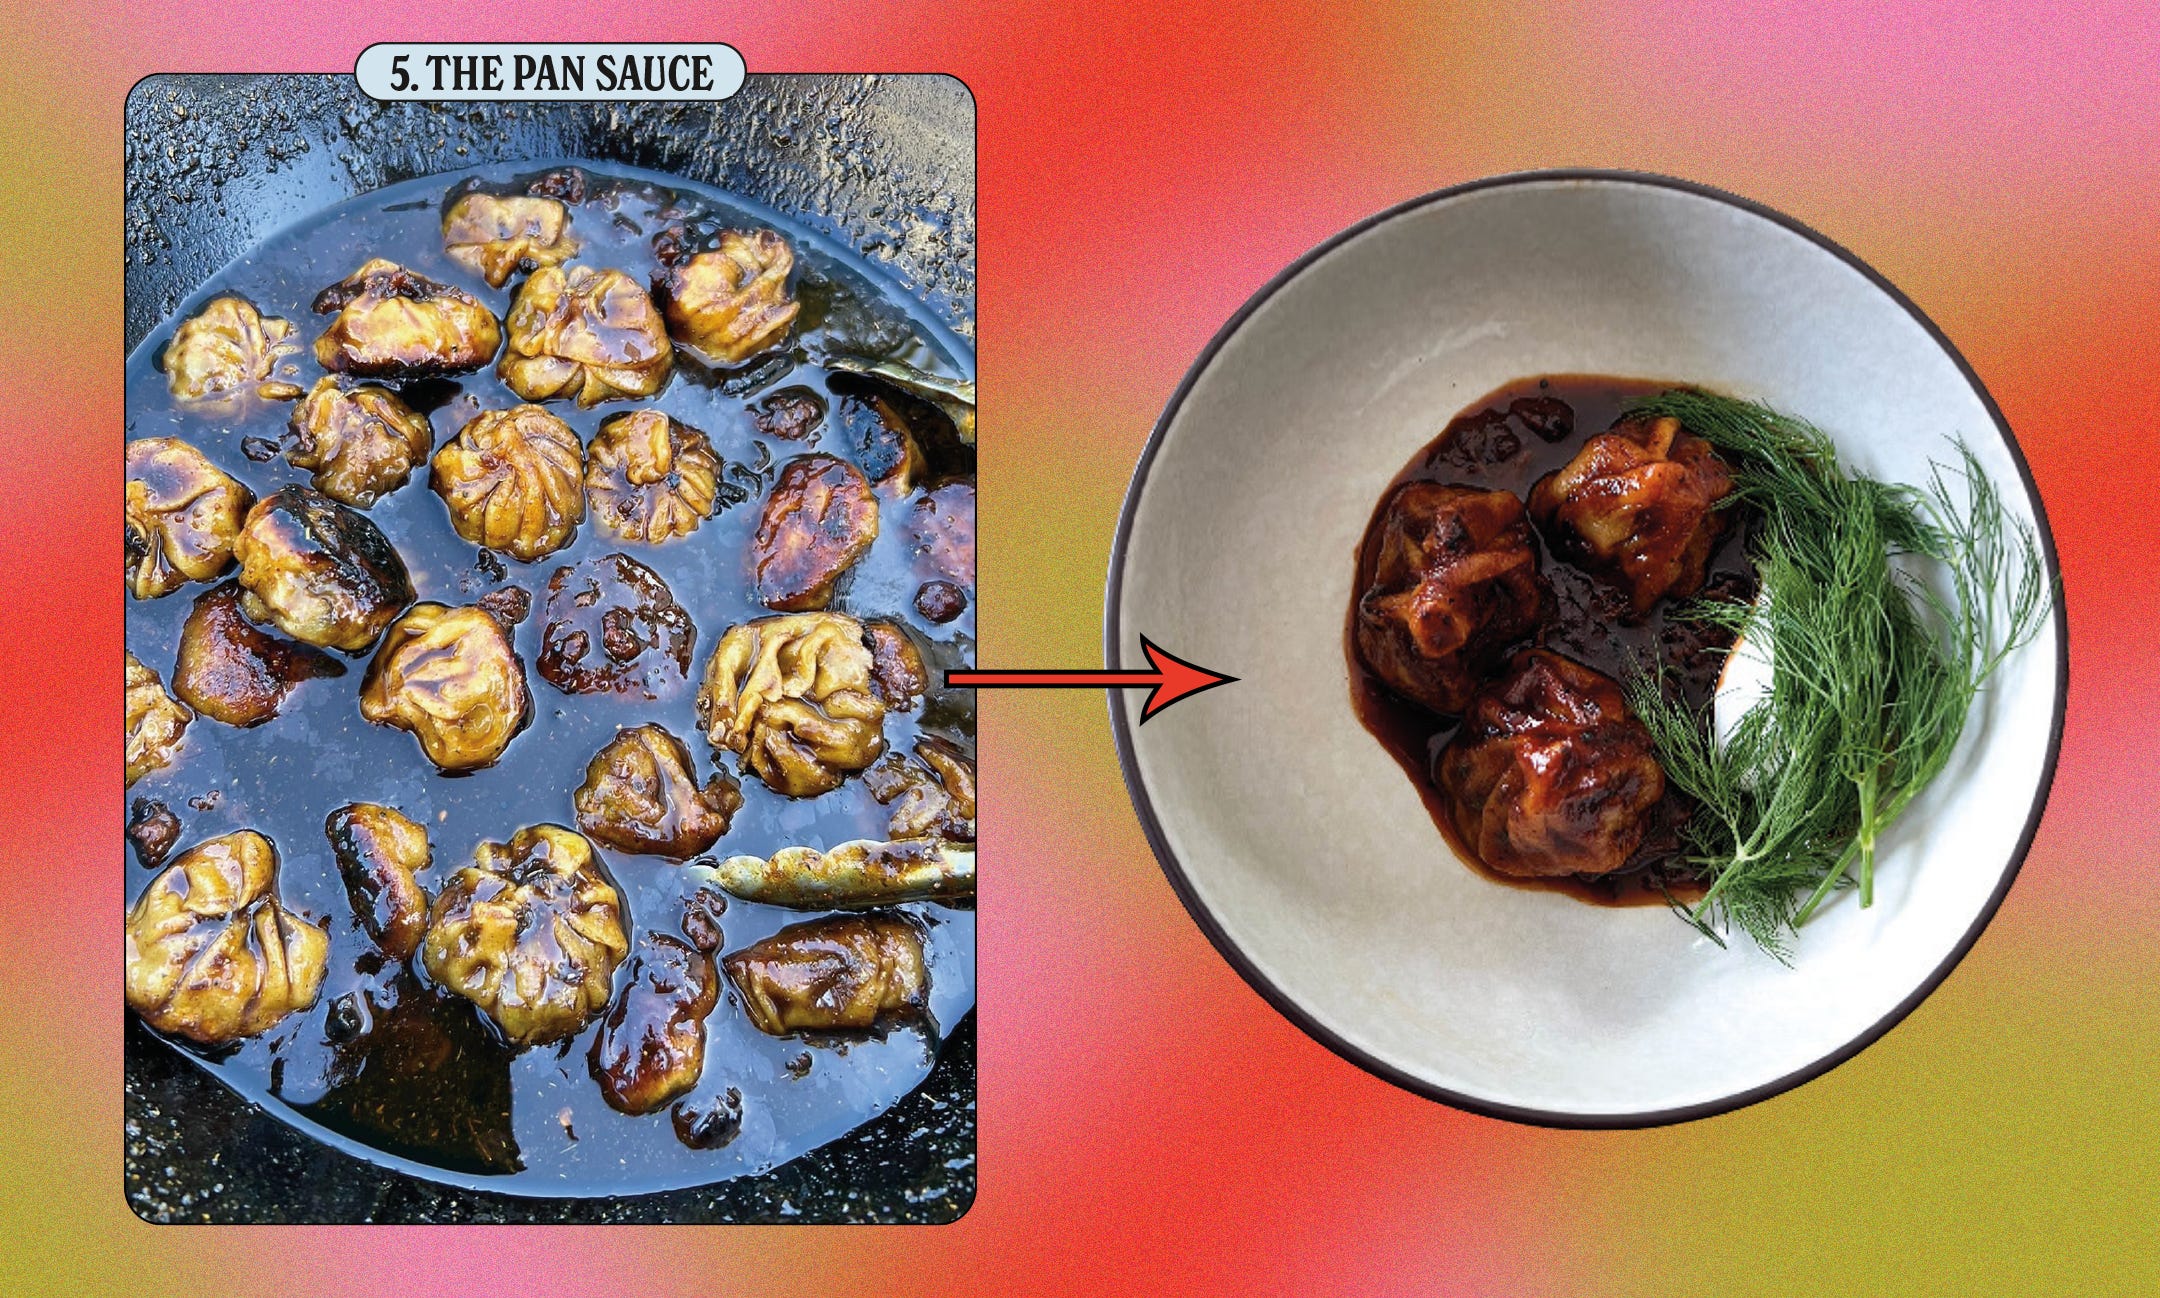 On the left, pan seared khinkali in pan sauce, on the right, plated in pan sauce and garnished with dill